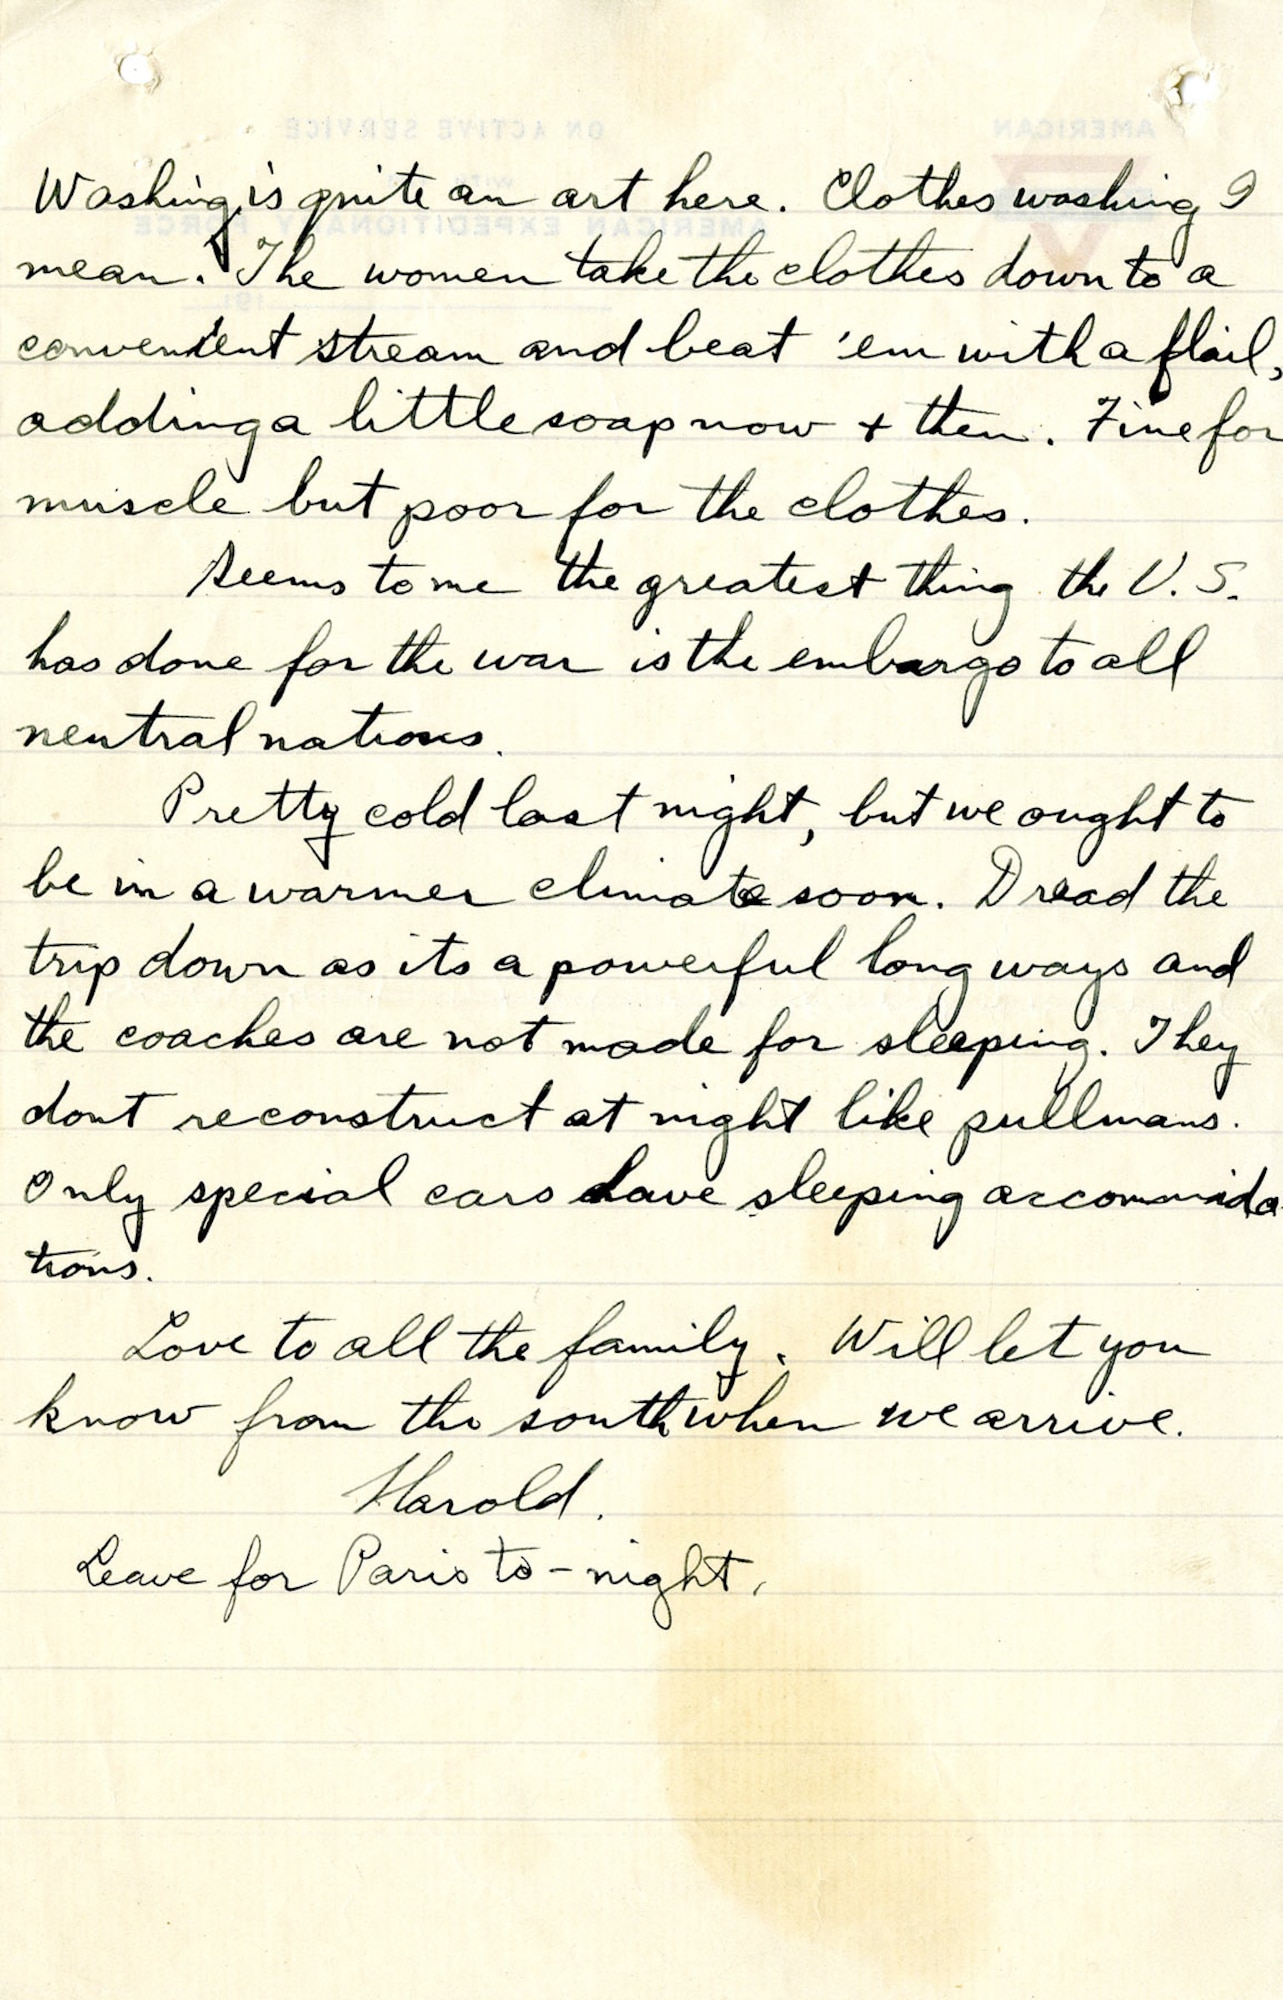 In September 1917, Lt. Harold R. Harris, who had recently completed Ground School at the University of California Berkeley, was en-route to Italy, to assist in establishing the 8th Aviation Instruction Center for the Allied Expeditionary Force in Foggia. This is page 3 of the letter Harris wrote to his family before leaving France. He asked them to send him several things, including new officer's insignia and magazines. (U.S. Air Force photo)